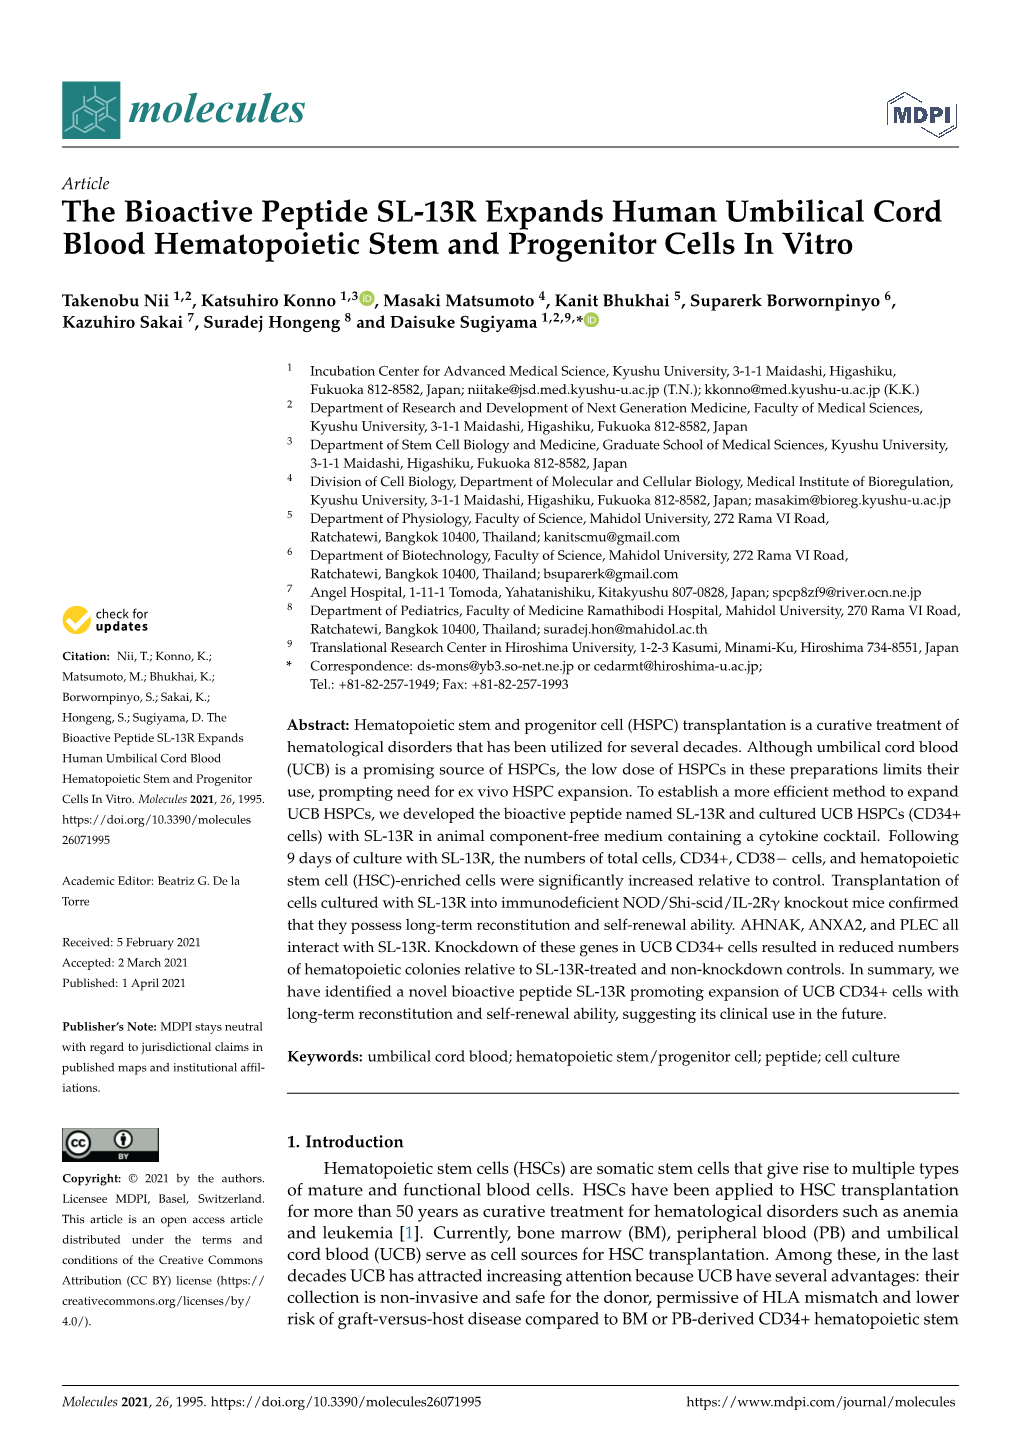 The Bioactive Peptide SL-13R Expands Human Umbilical Cord Blood Hematopoietic Stem and Progenitor Cells in Vitro